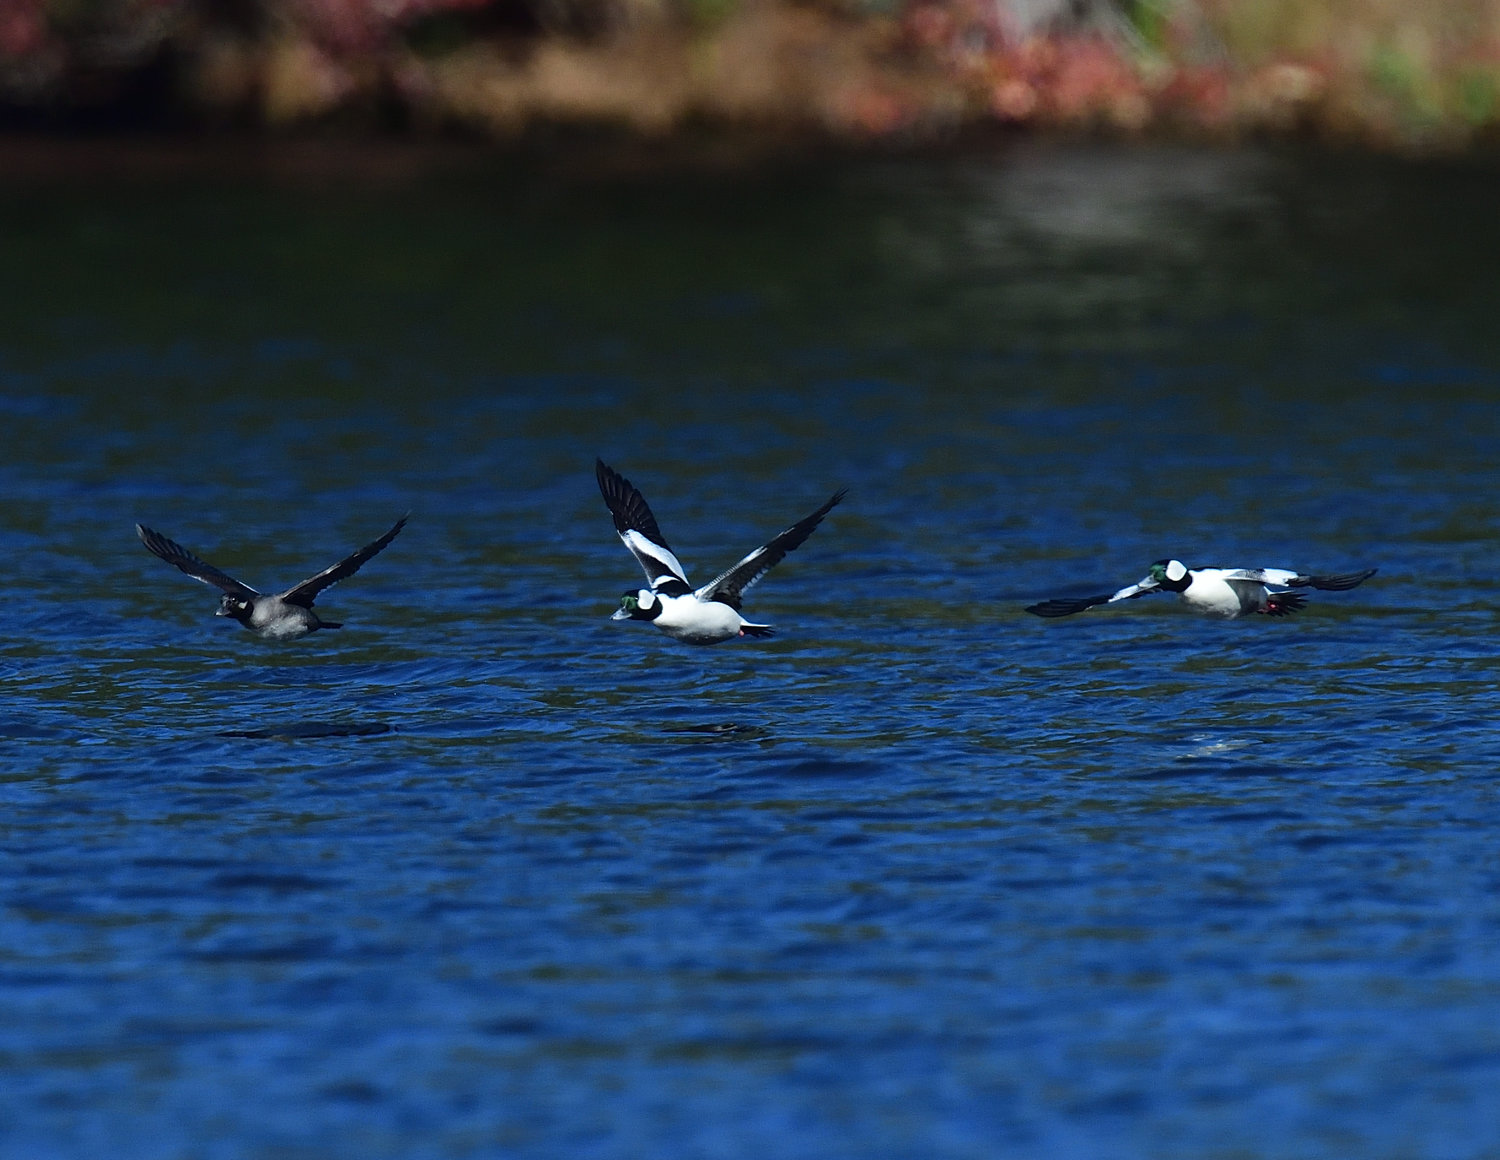 The trio of buffleheads are now in flight, with the female now on the left. The male on the right is in the downstroke of its wing beat, and the leading edge of the wings are curled down slightly. This is how birds produce forward thrust as well as lift; the flight feathers on the trailing edge of the wings are working in concert. The male in the middle is near maximum upstroke. Notice the brilliant white marks on the upper surface of the right wing.